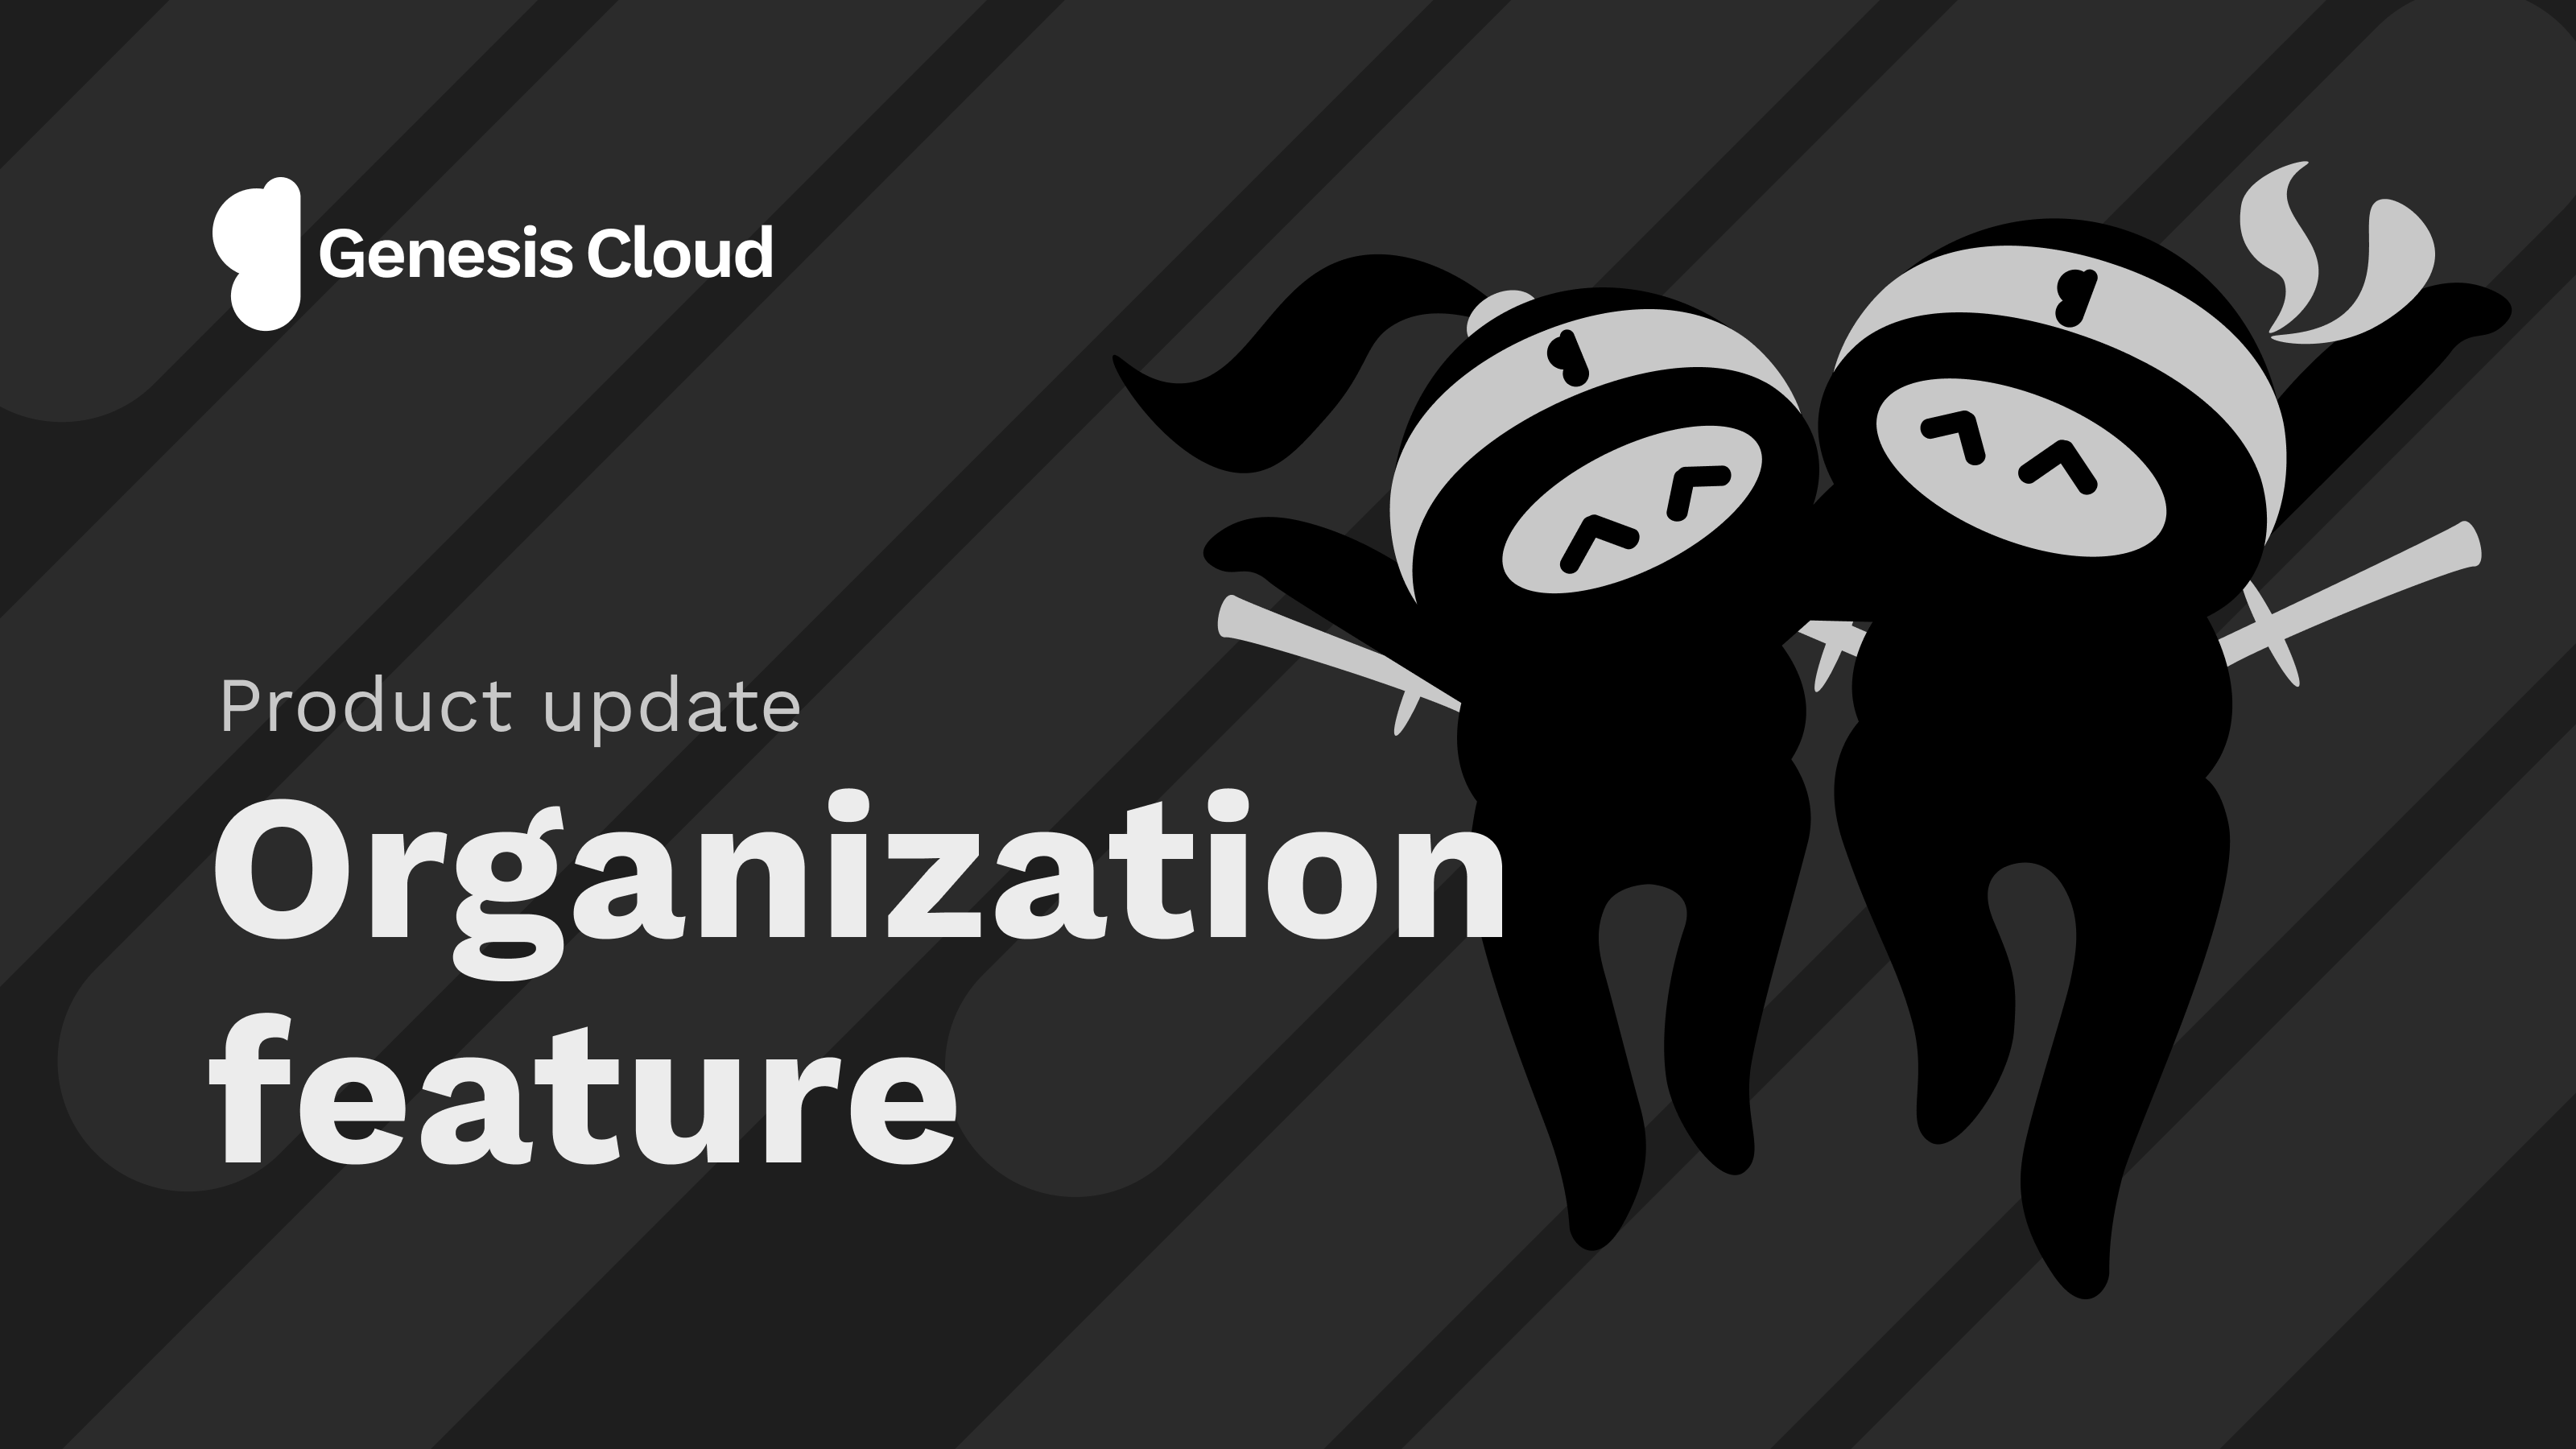 Introducing our new Feature: Organizations and Multi-Projects